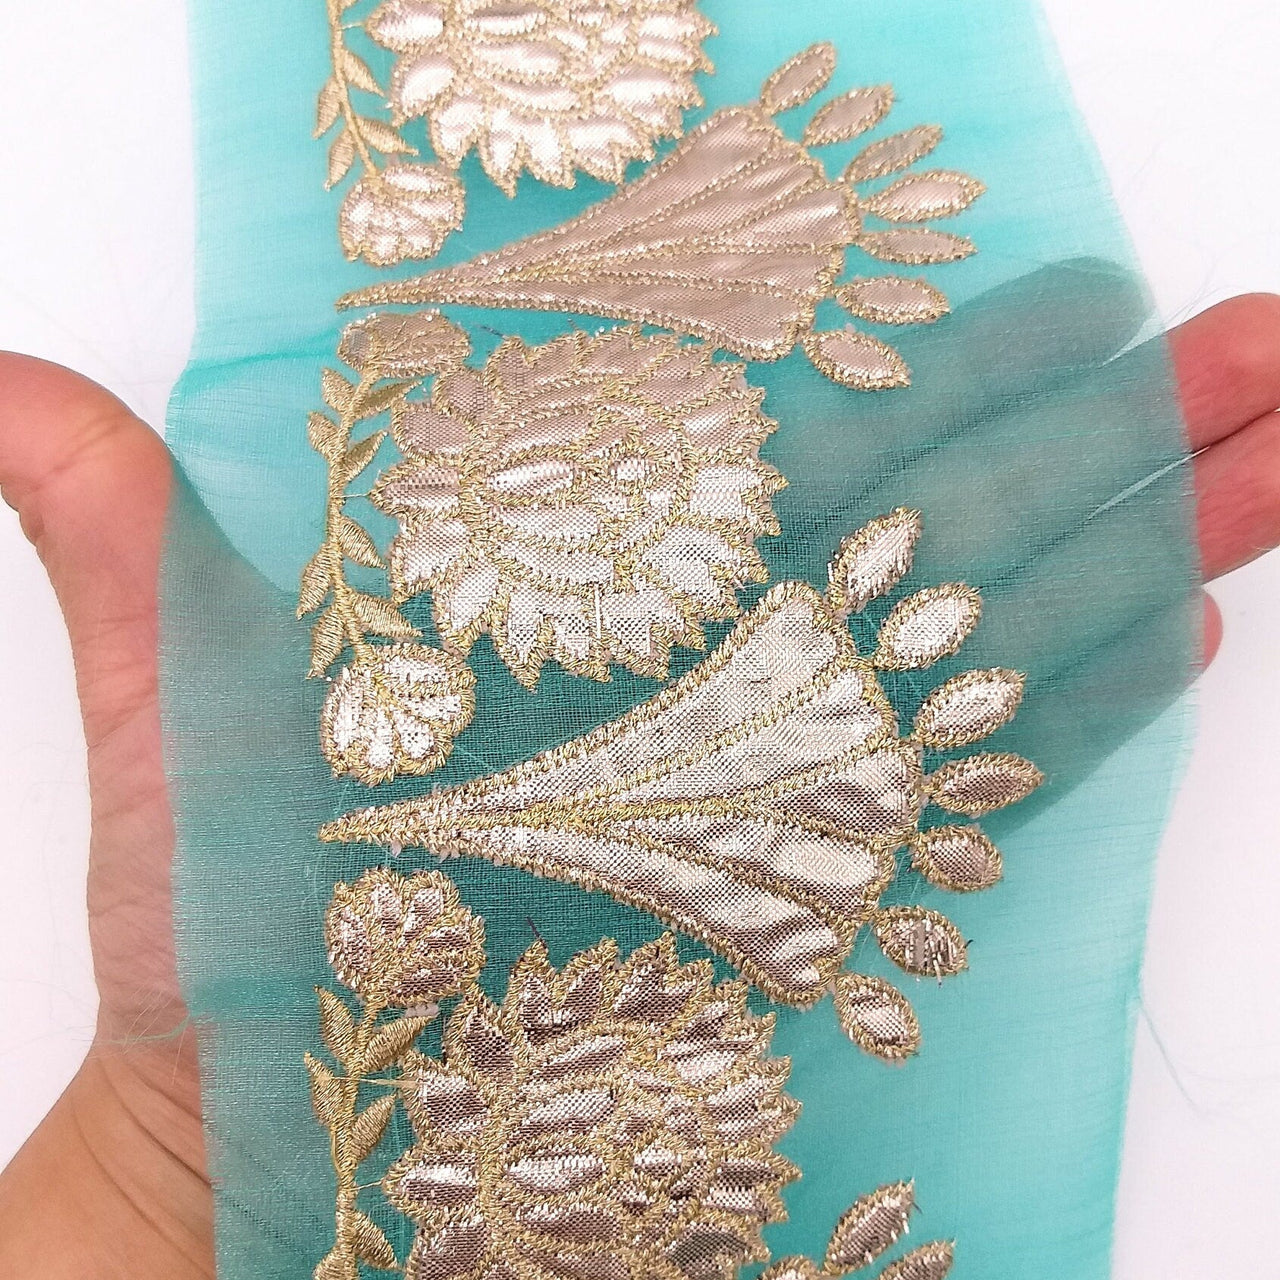 Blue Tissue Fabric Lace Trim with Gota Patti Embroidery, Foiled Embroidery in Silver, Sari Border Trim By Yard Decorative Trim Craft Lace